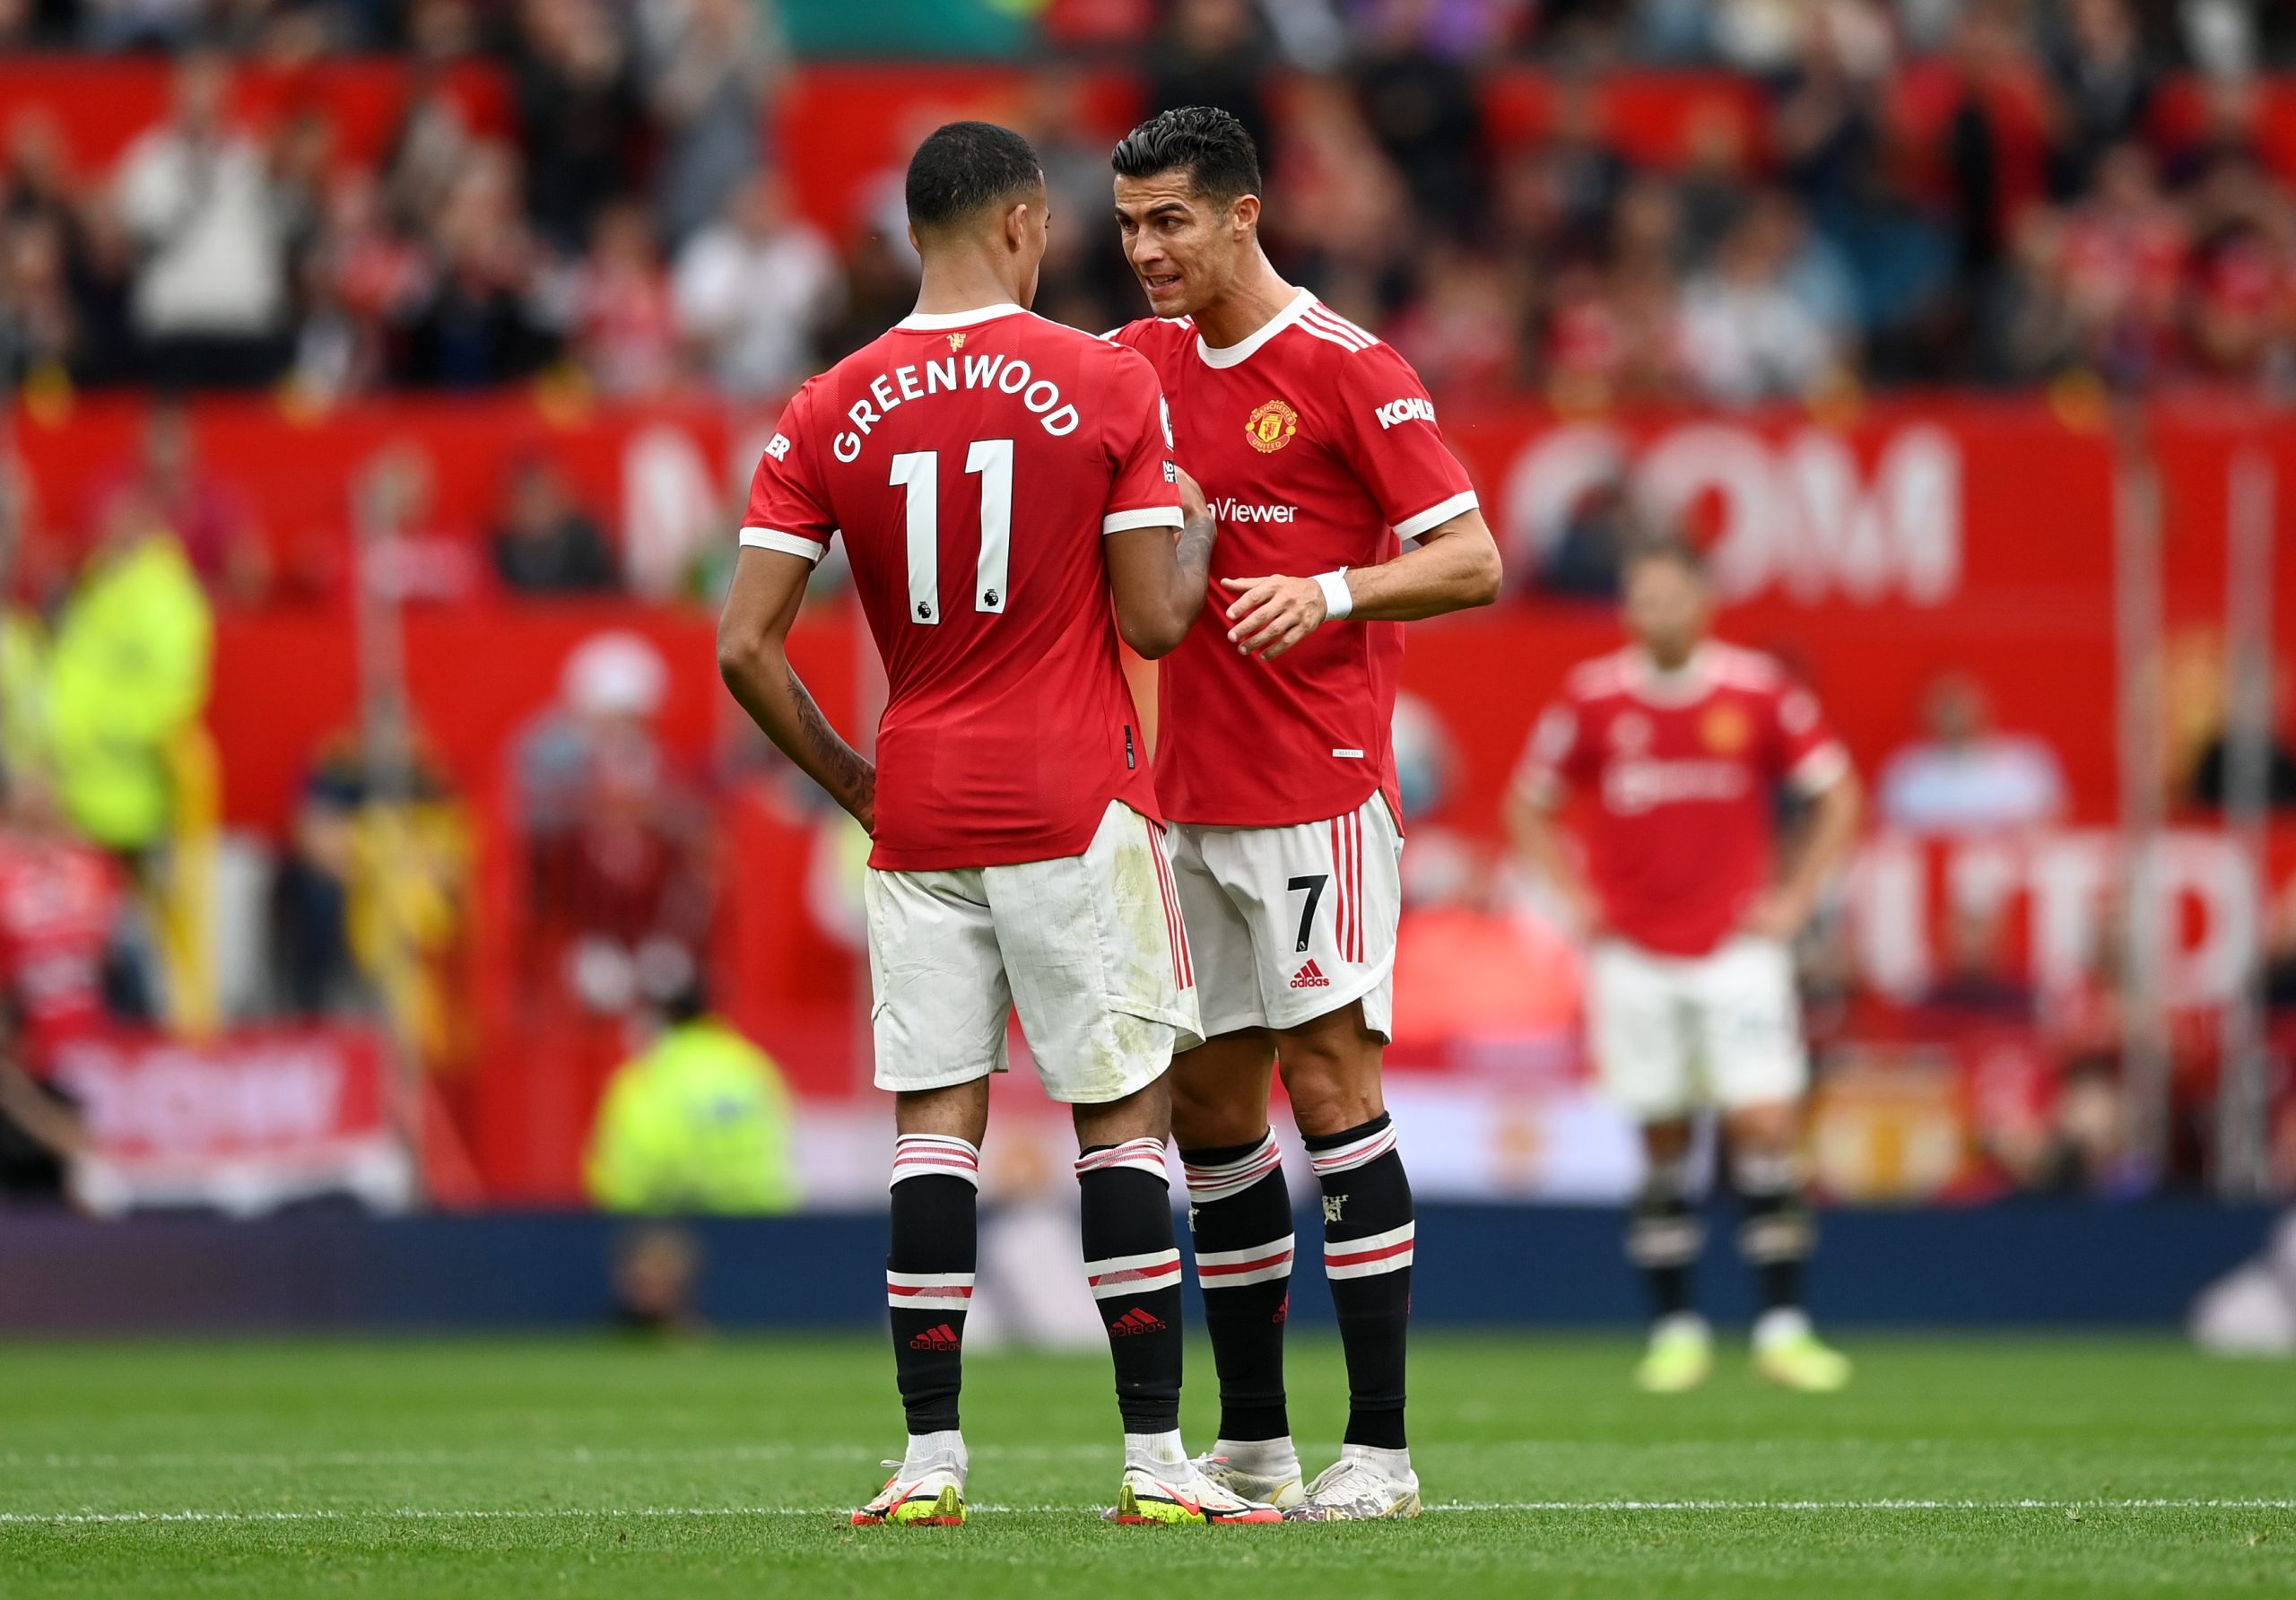 Manchester United star Mason Greenwood growing frustrated with Cristiano Ronaldo's growing influence at the club.